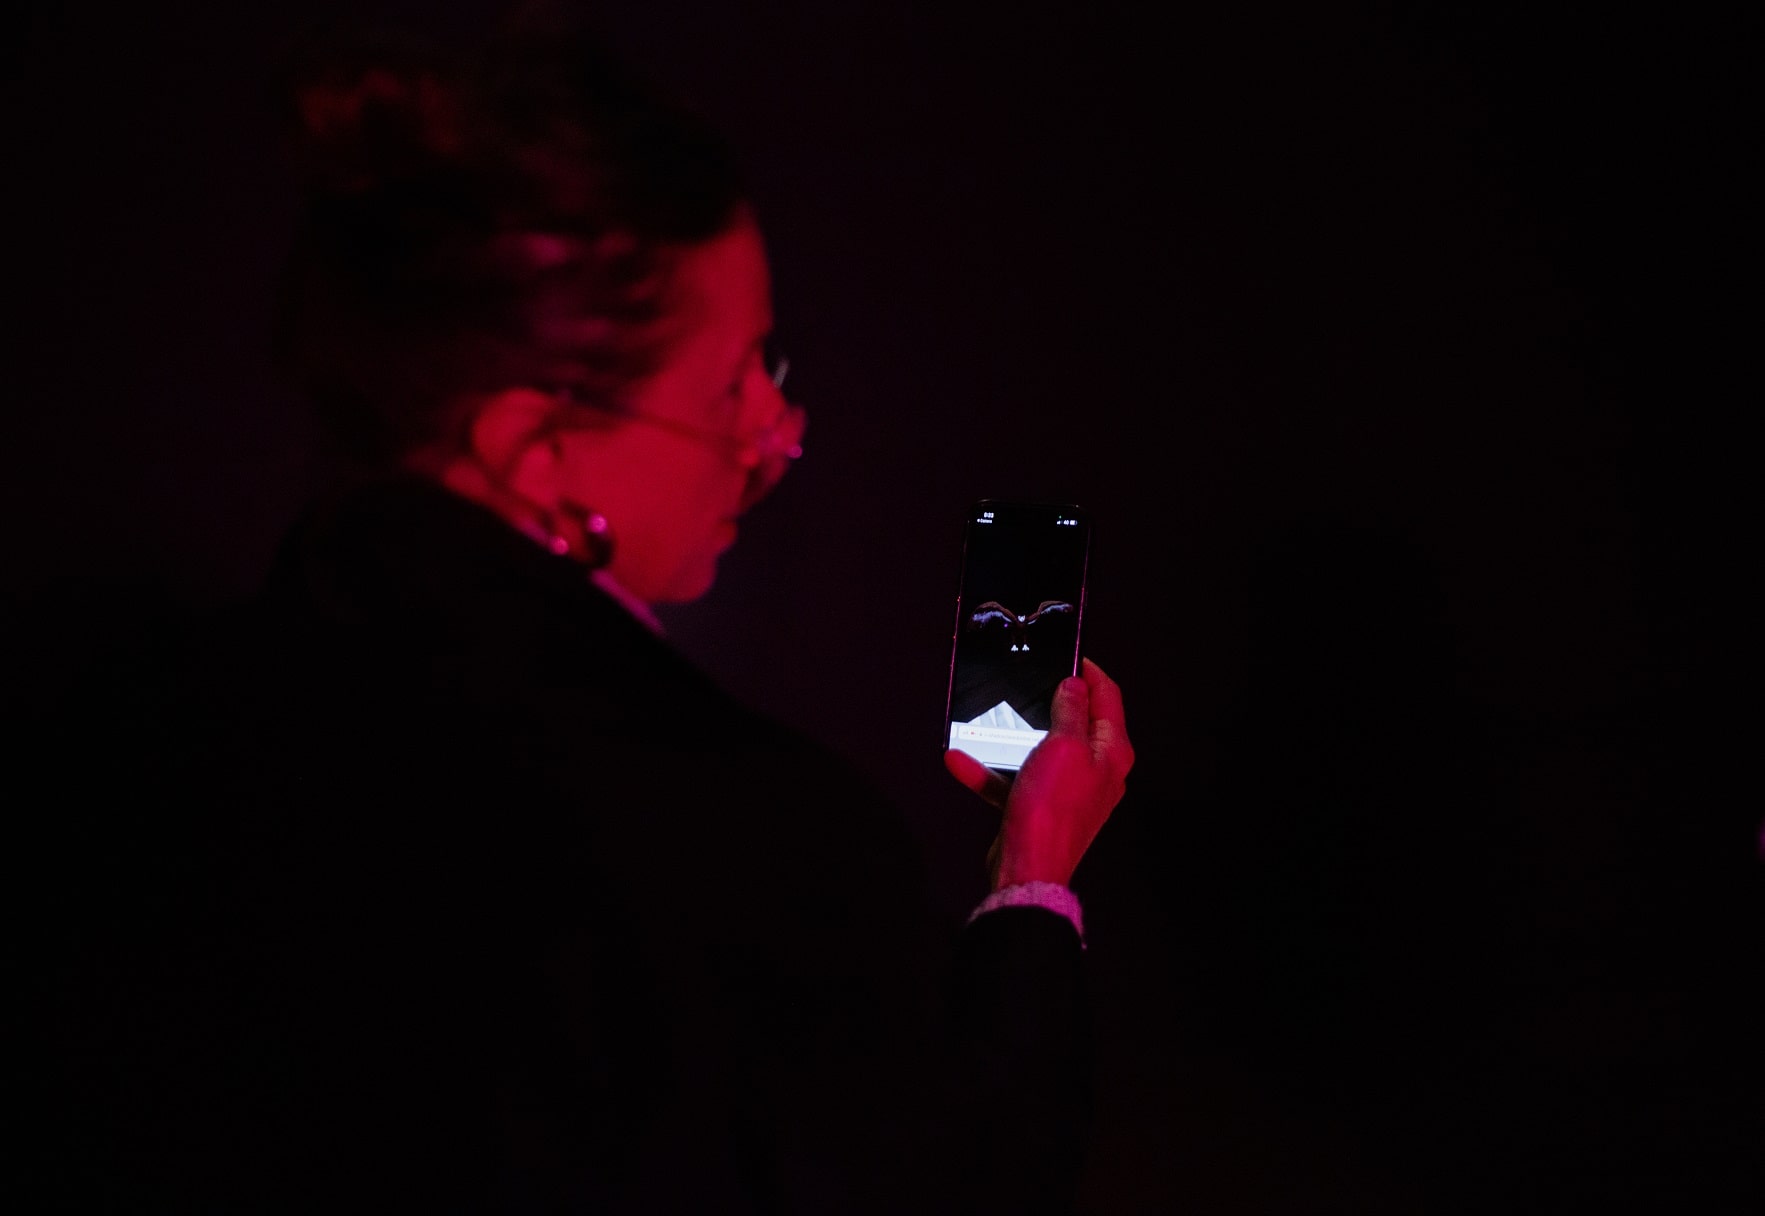 Over the shoulder image of a person in a darkly lit room holding a phone with an Augmented Reality eagle perched on wooden floors iin the screen of the phone.